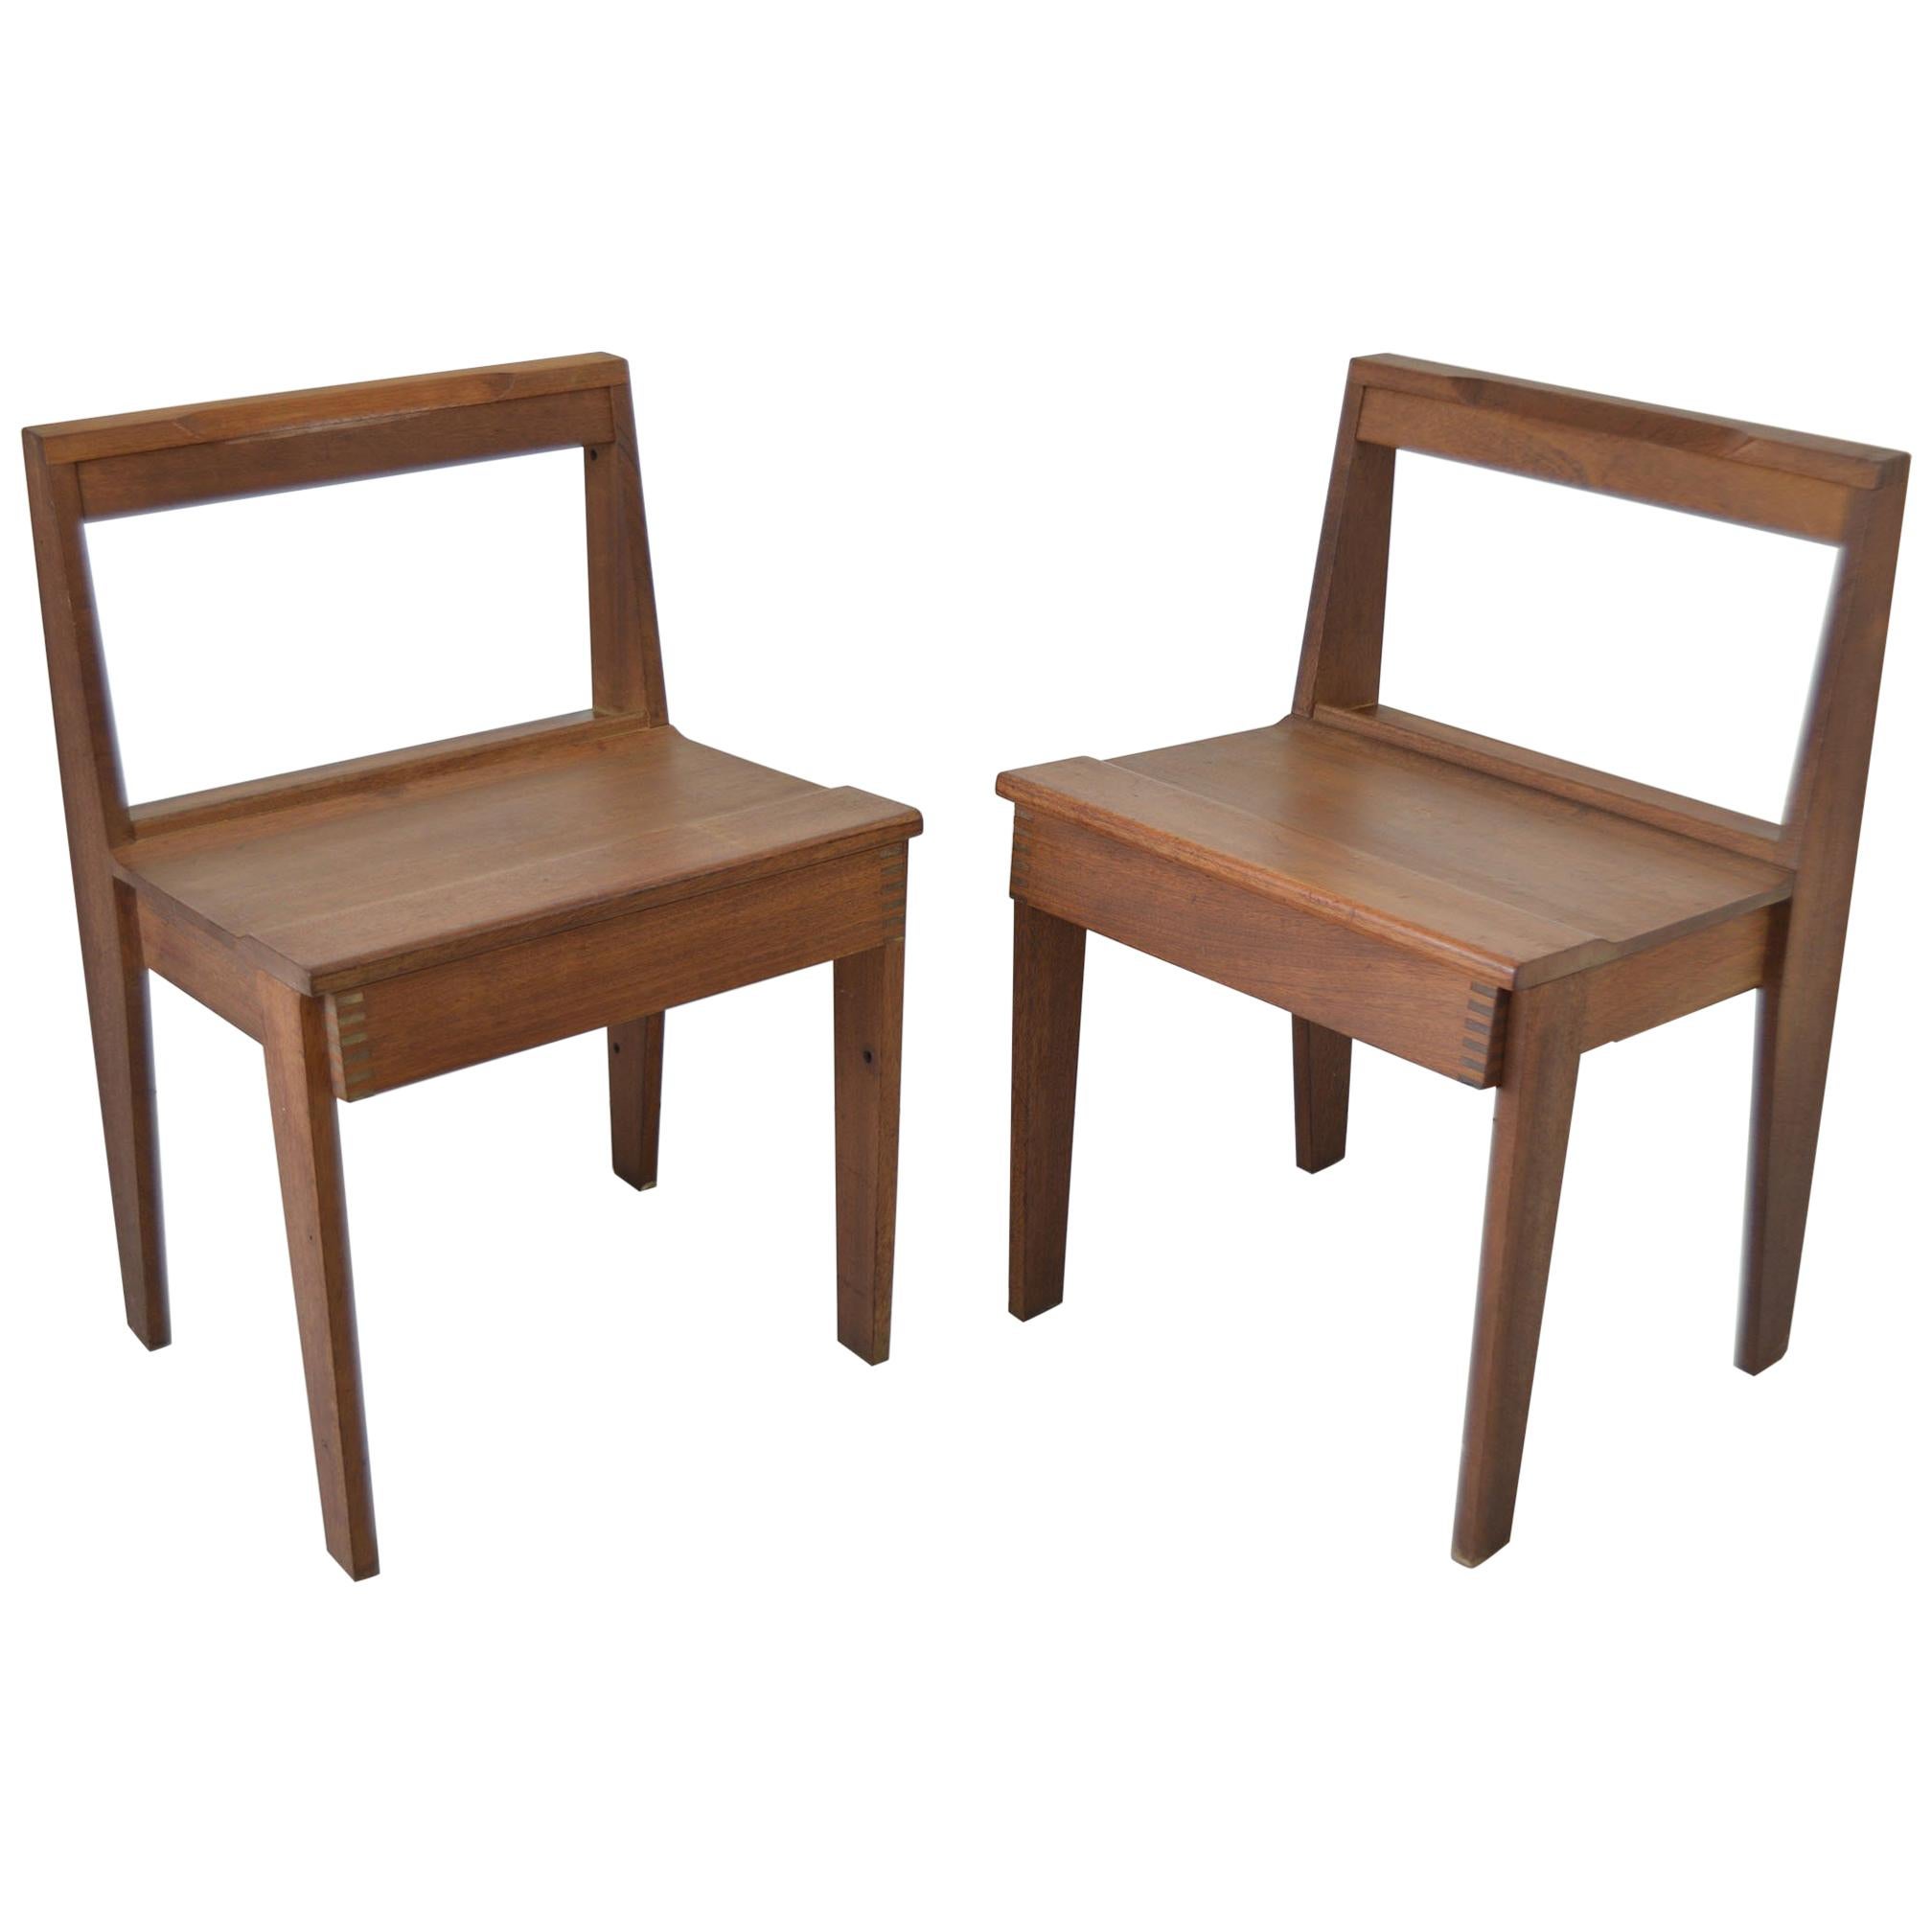 3 Midcentury Teak Cathedral Chairs or Bench